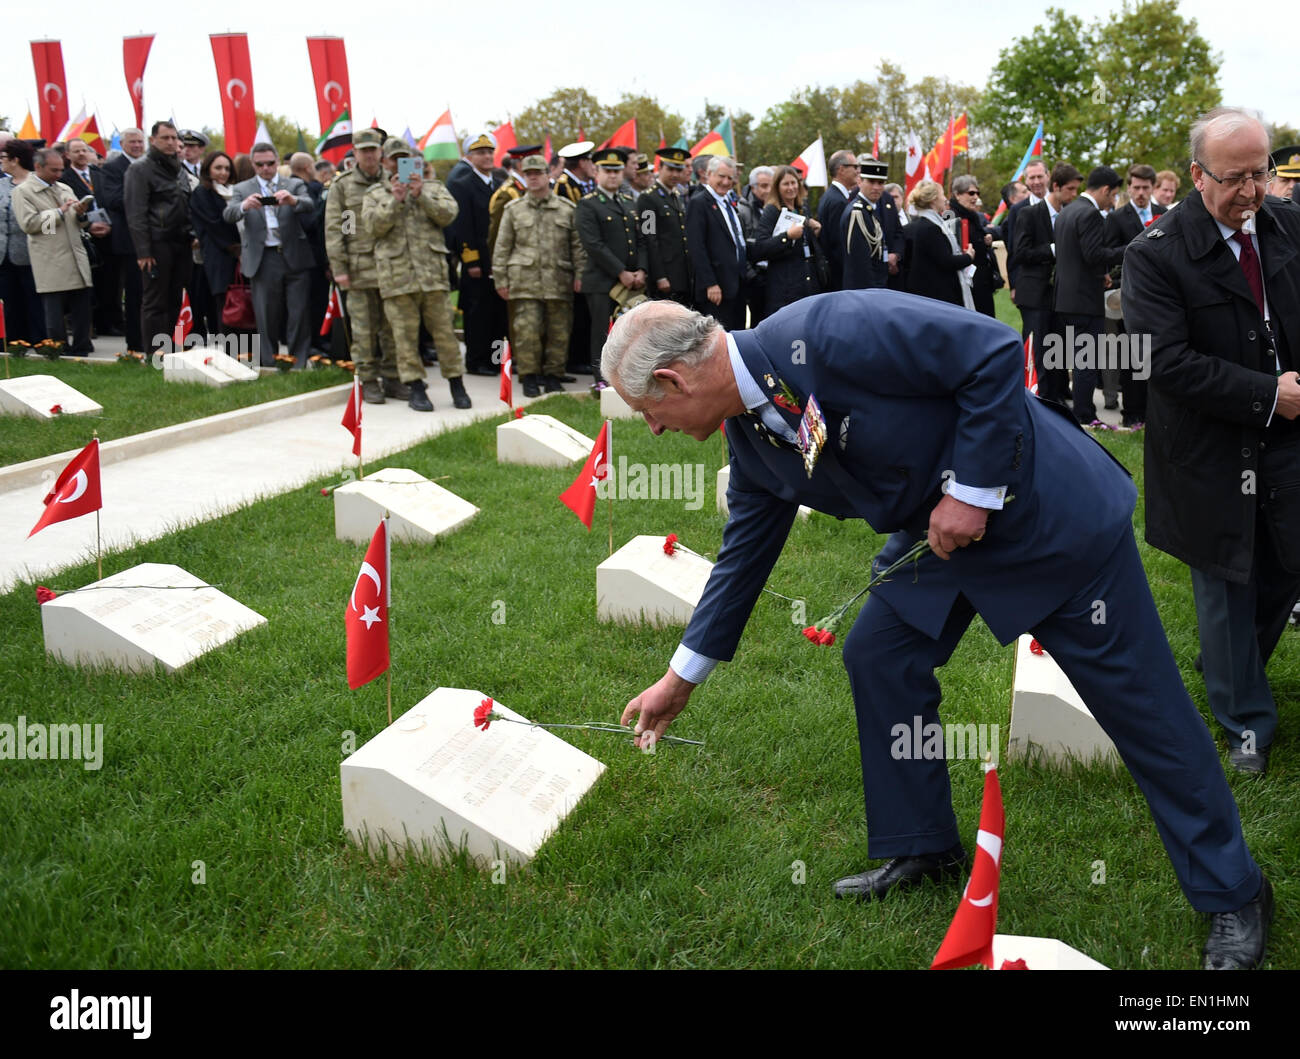 (150425) -- CANAKKALE, April 25, 2015(Xinhua) -- British Prince of Wales Charles presents a flower at the 57th Infantry Regiment Memorial in Canakkale, Turkey, April 25, 2015. Leaders and dignitaries from the UK, Ireland, Australia and New Zealand joined Turkish military delegates to attend Turkish memorial service on Saturday at the 57th Infantry Regiment Memorial, as an event of 100th anniversary of the Gallipoli Battle. (Xinhua/He Canling) Stock Photo